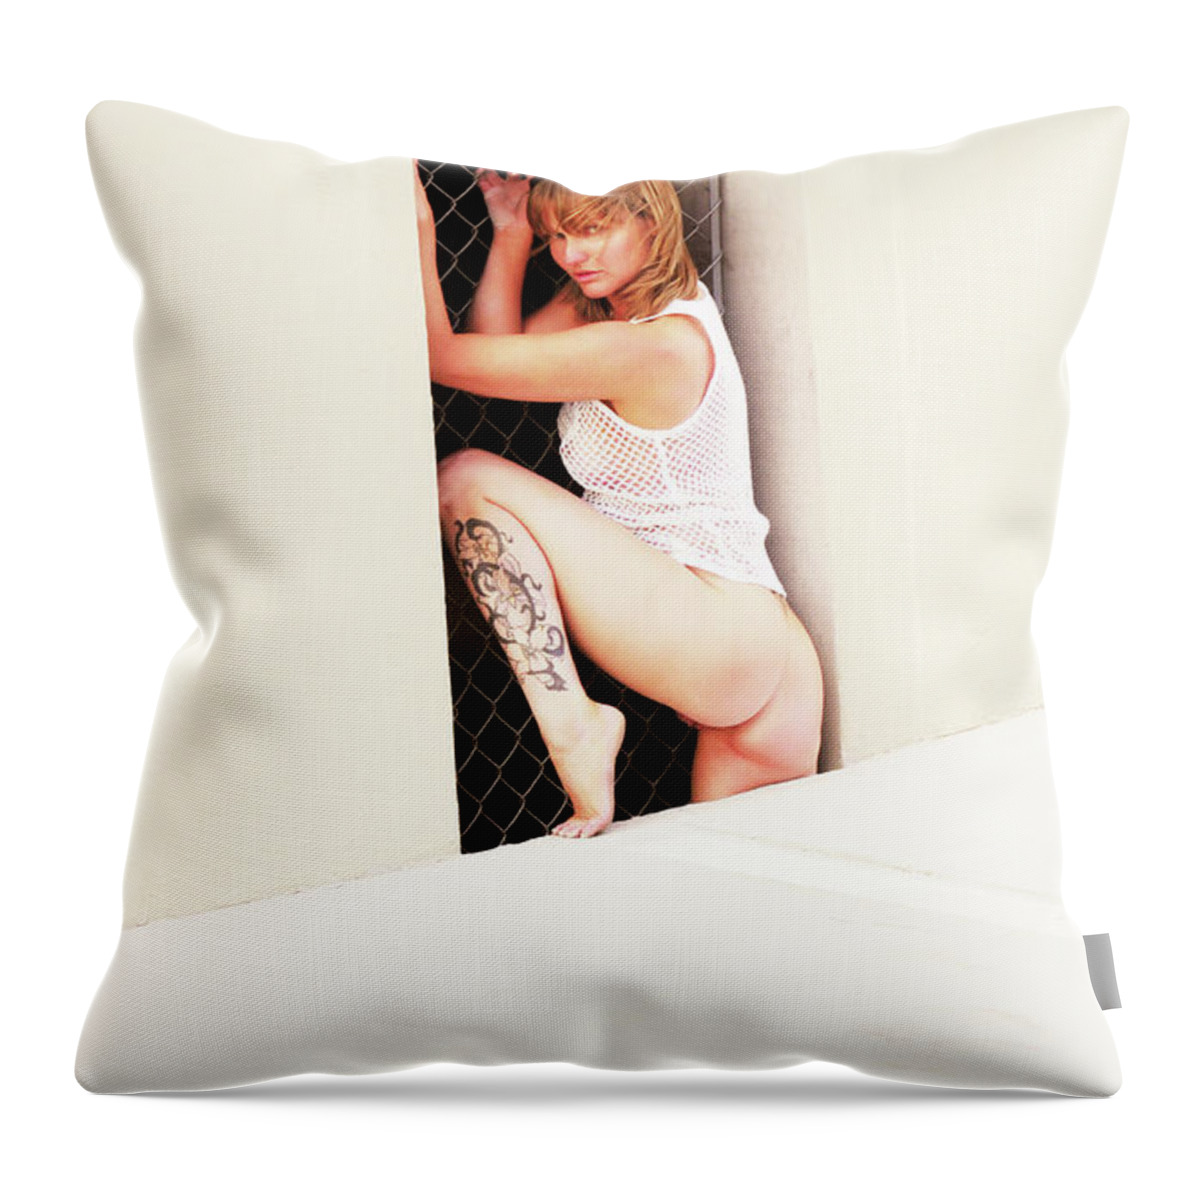 Girl Throw Pillow featuring the photograph The Break In by Robert WK Clark